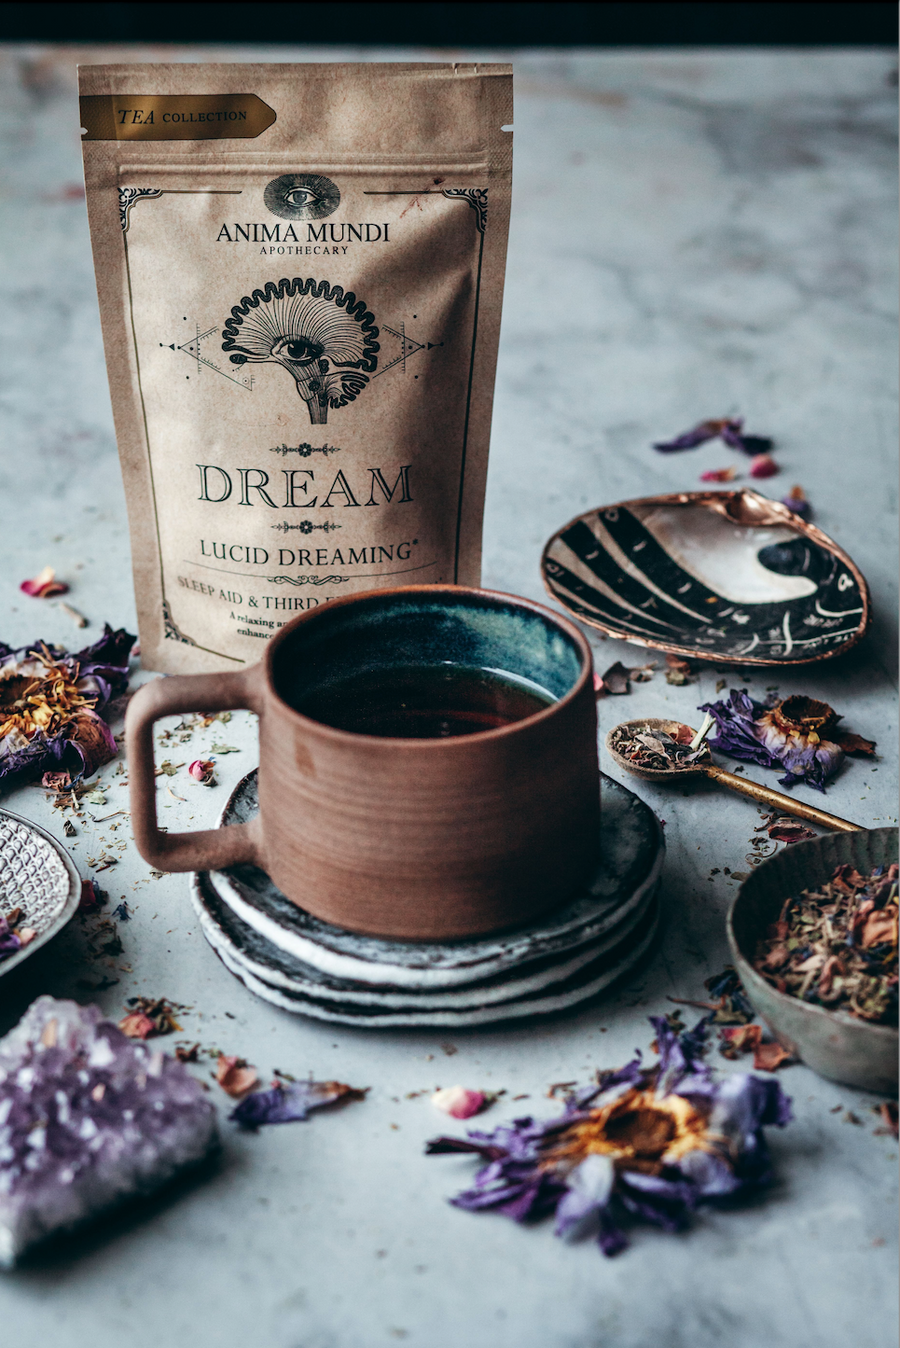 anima mundi dream tea, lucid dreaming / These herbs have been used since ancient times to assist the body in entering deep states of meditation and sleep. Composed of relaxing plants, also known as nervines, such as organic Skullcap, Blue Lotus, Passionflower and Kava Kava.